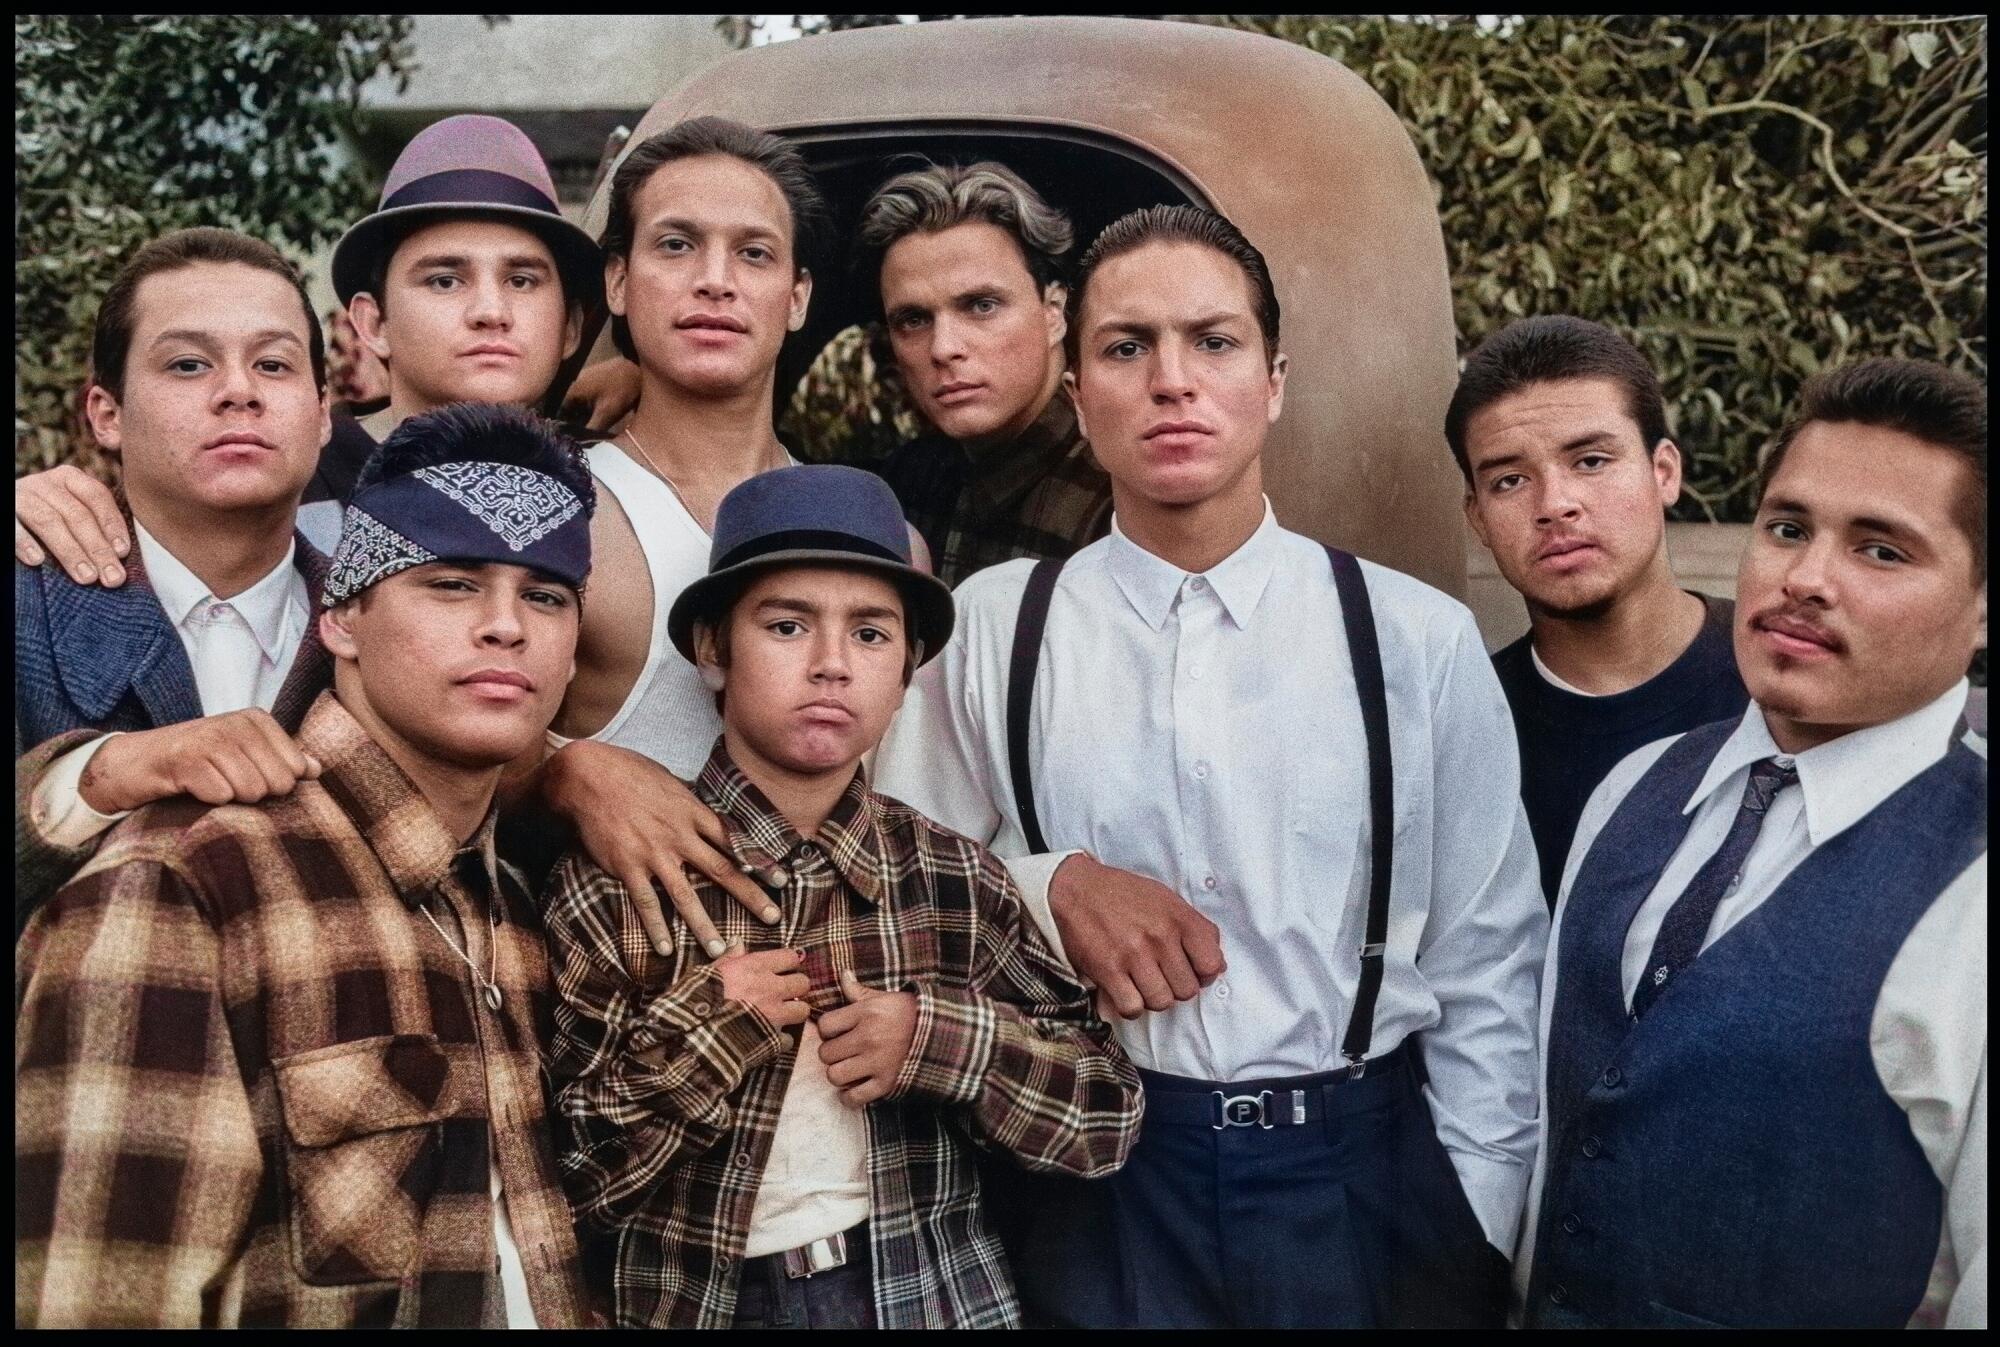 The actors who comprise the Vatos Locos gang pose in pachuco and cholo attire in front of a rusted-out pickup truck.